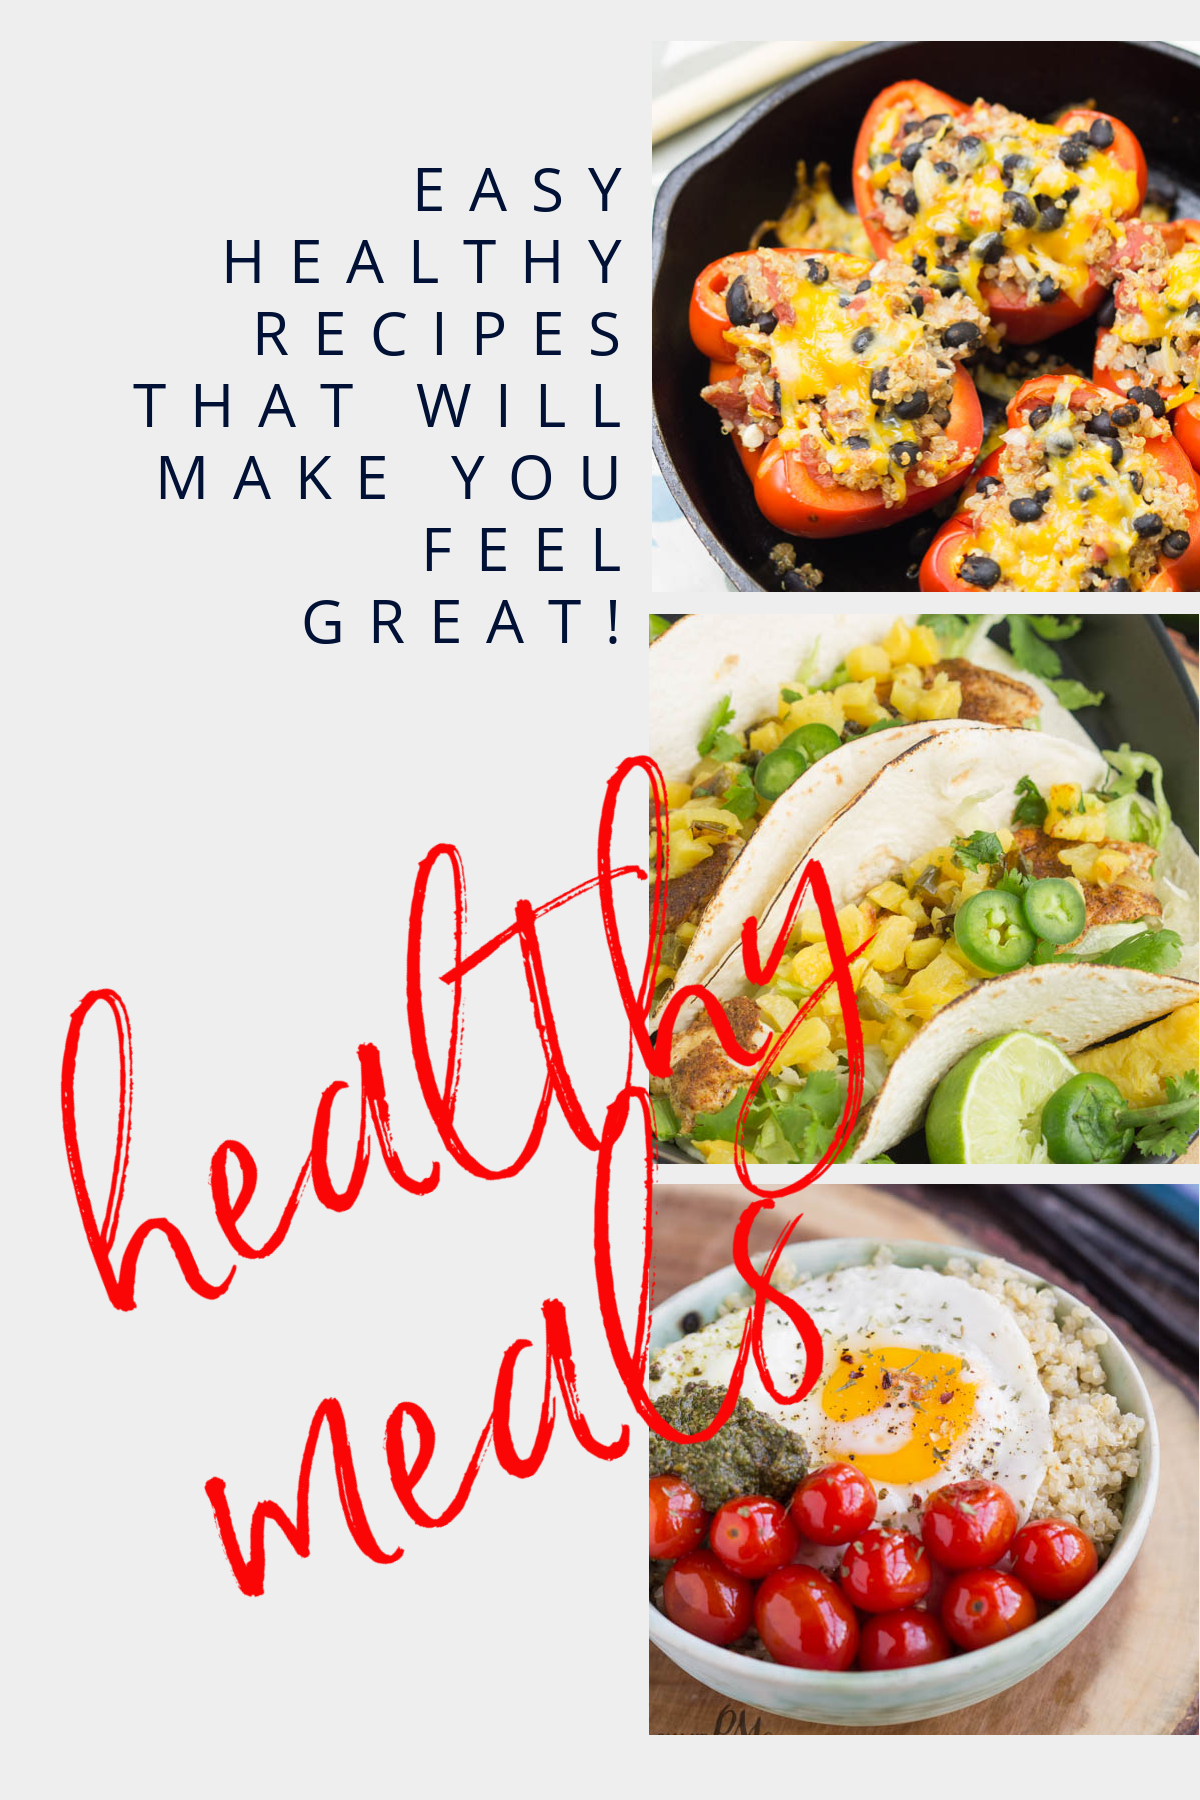 17 Easy Healthy Meals that Will Make You Feel Great